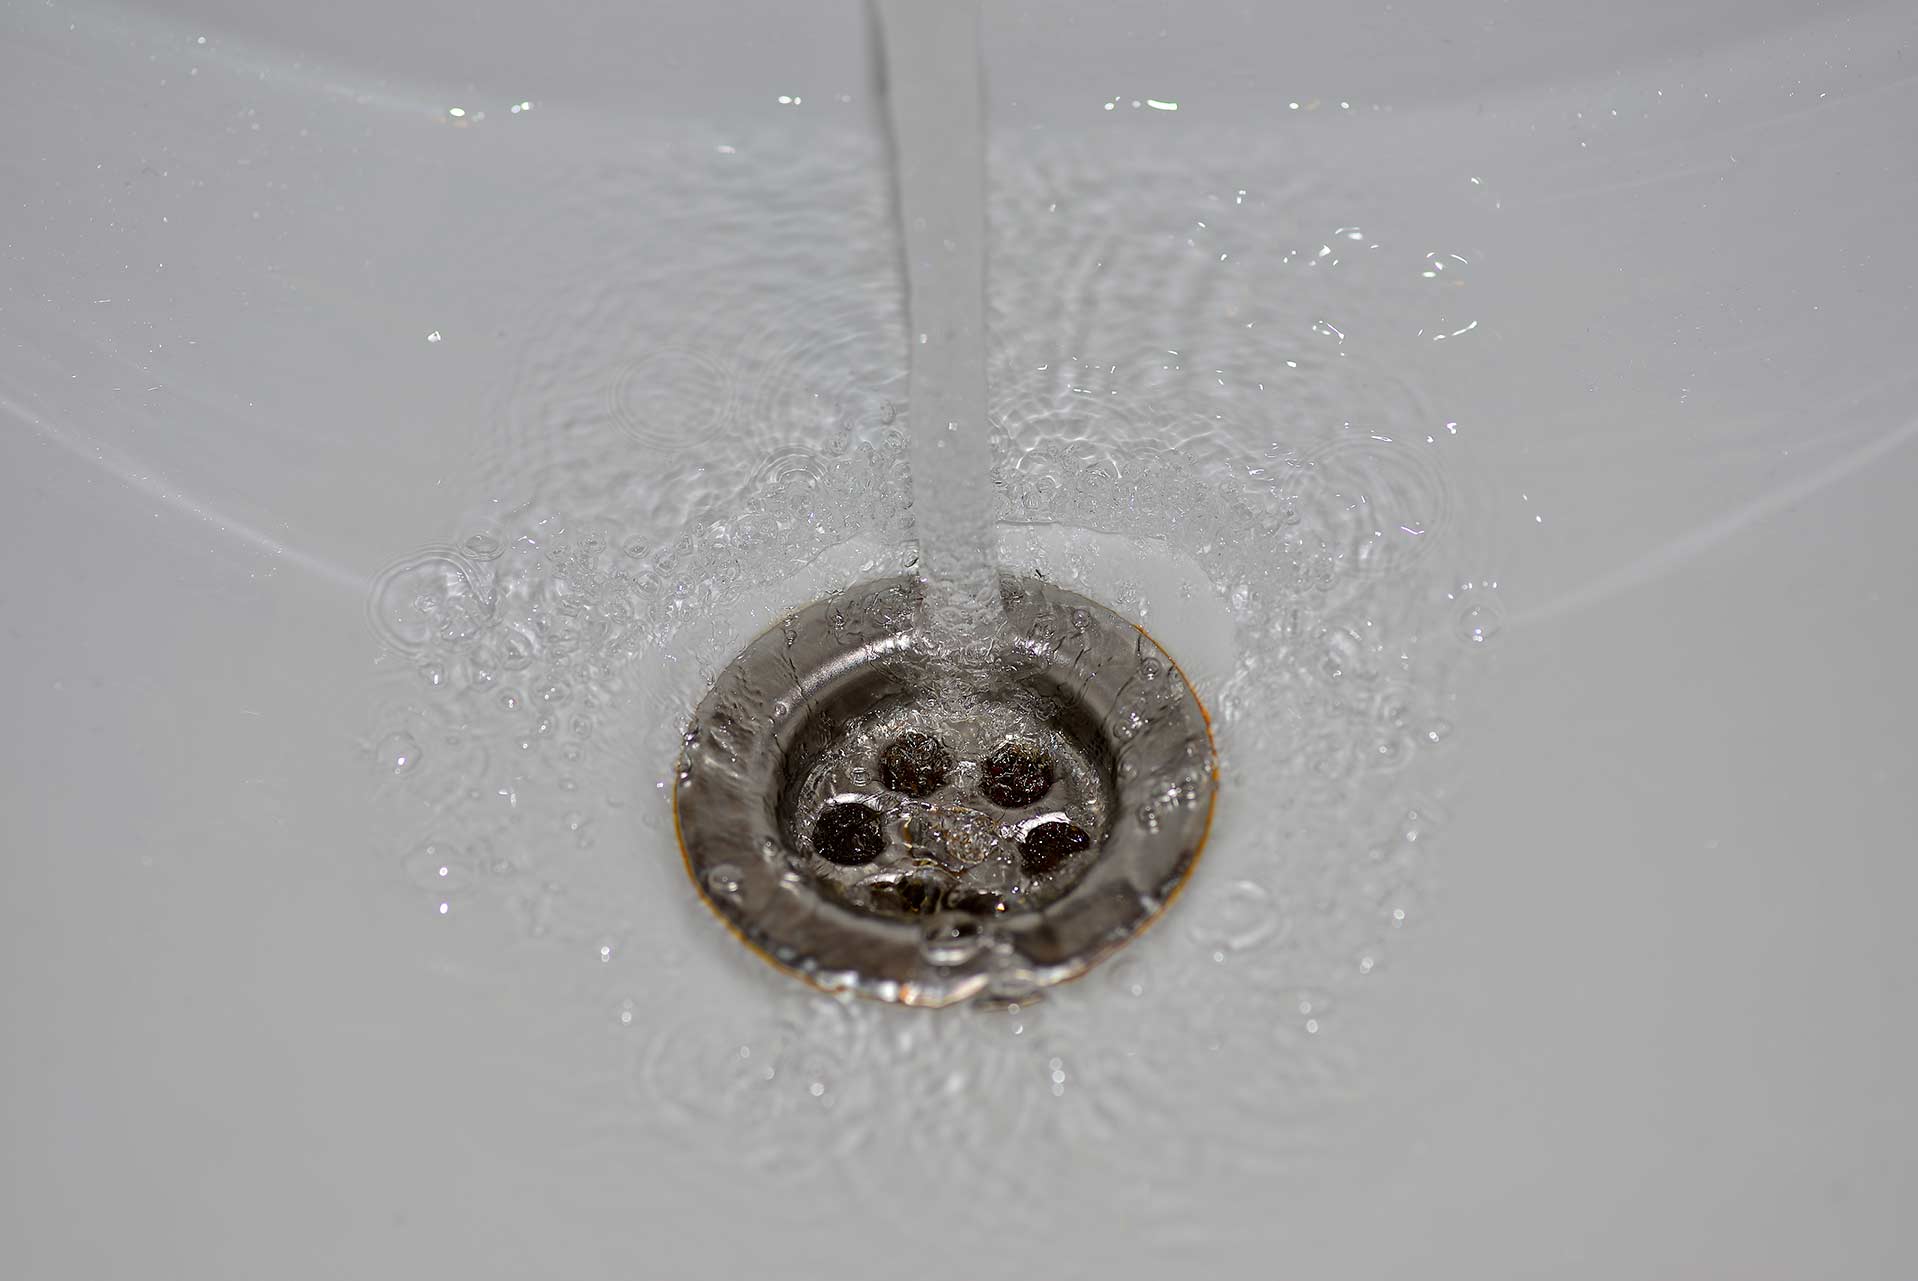 A2B Drains provides services to unblock blocked sinks and drains for properties in Gidea Park.